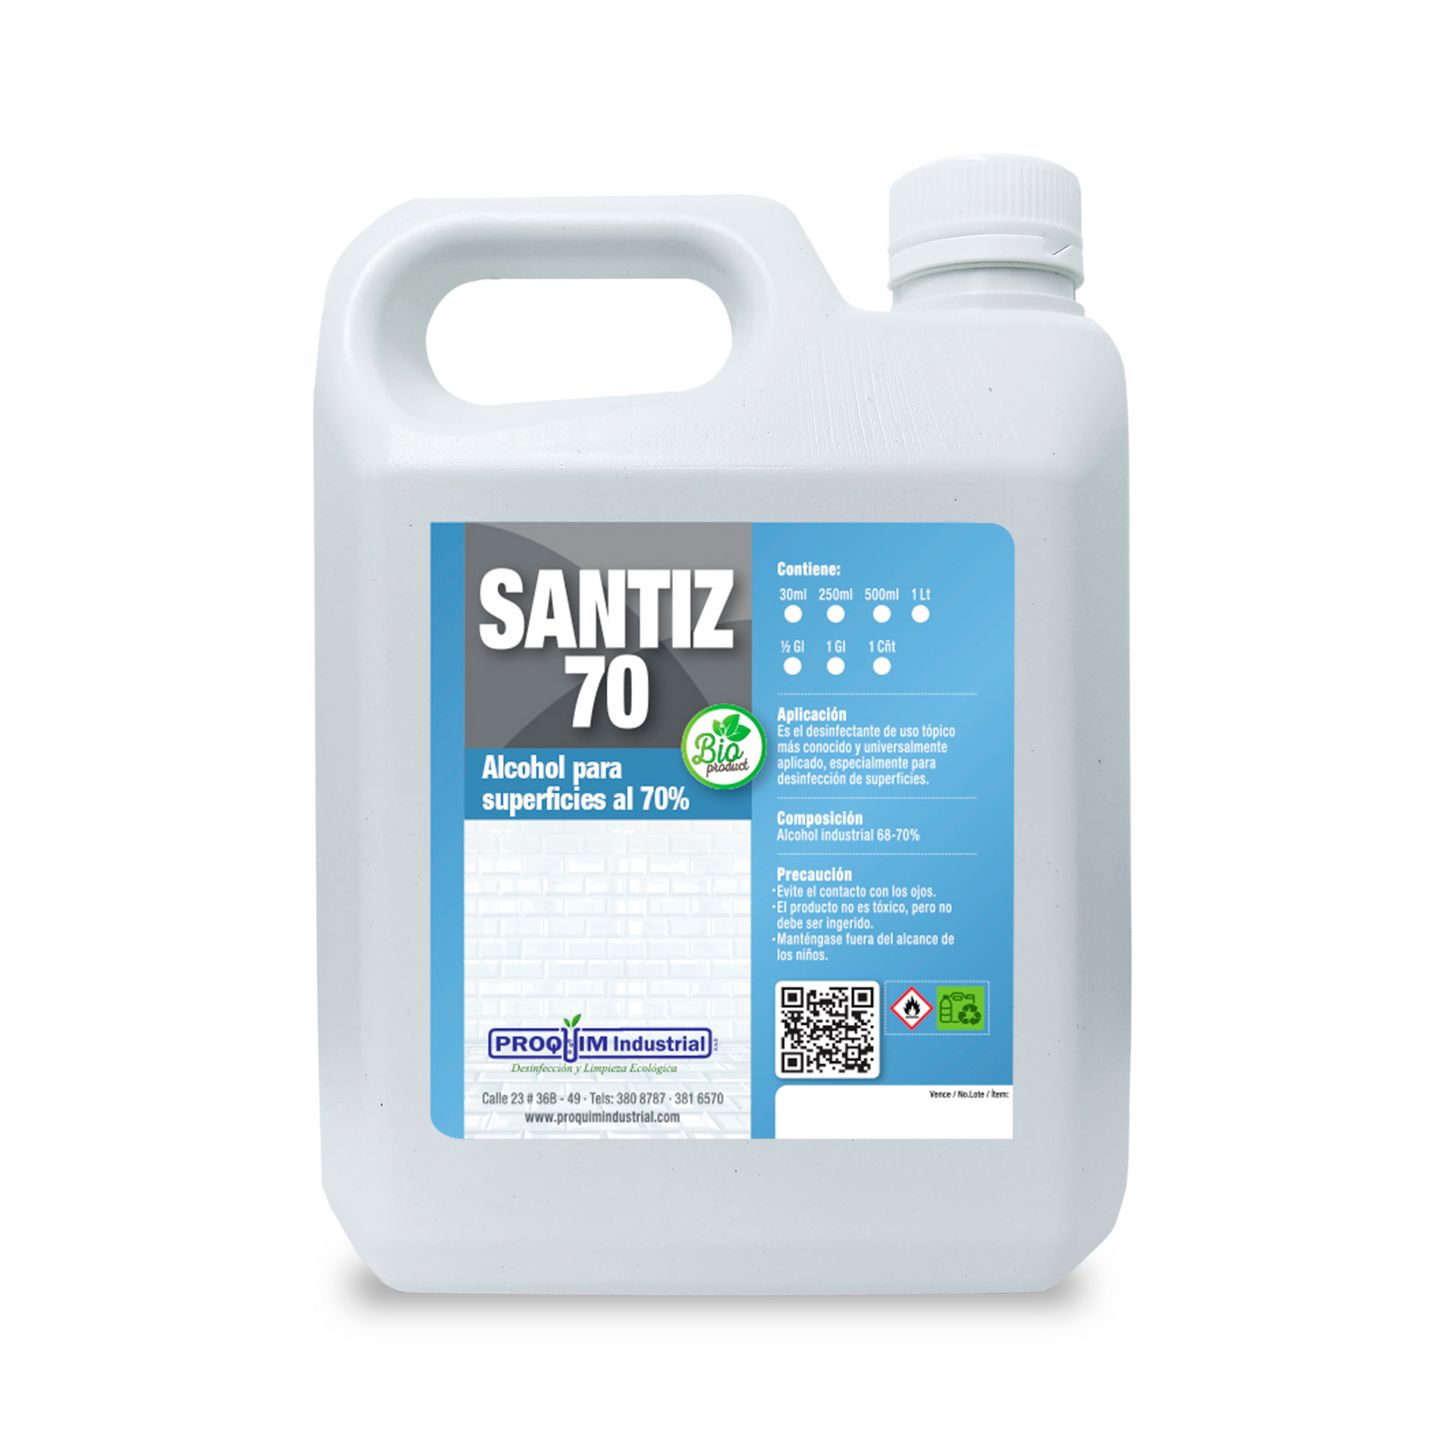 70% alcohol for all types of surfaces | Santiz 70.